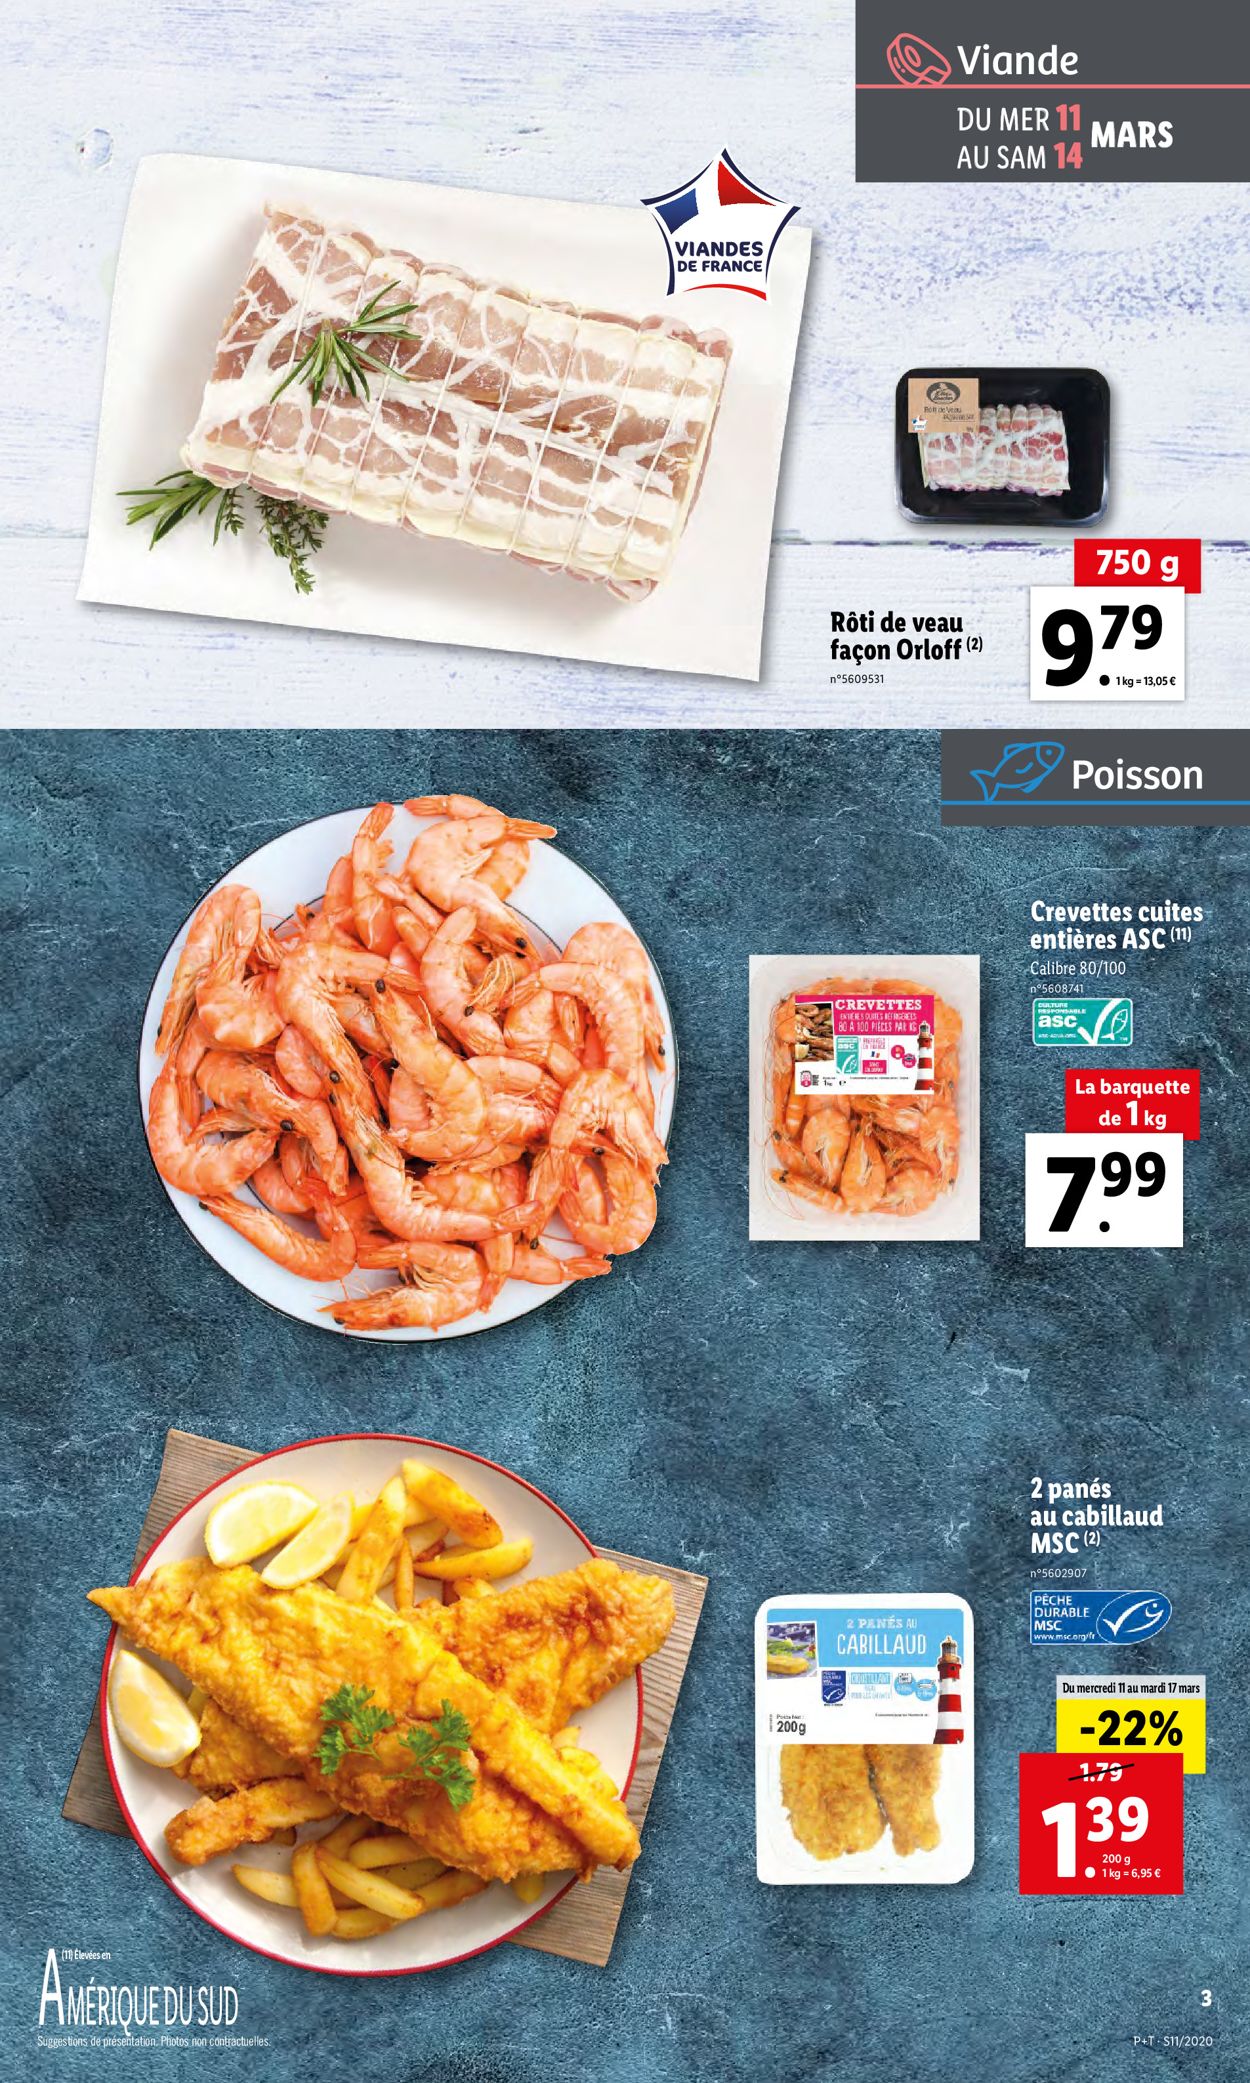 Lidl Catalogue - 11.03-17.03.2020 (Page 3)